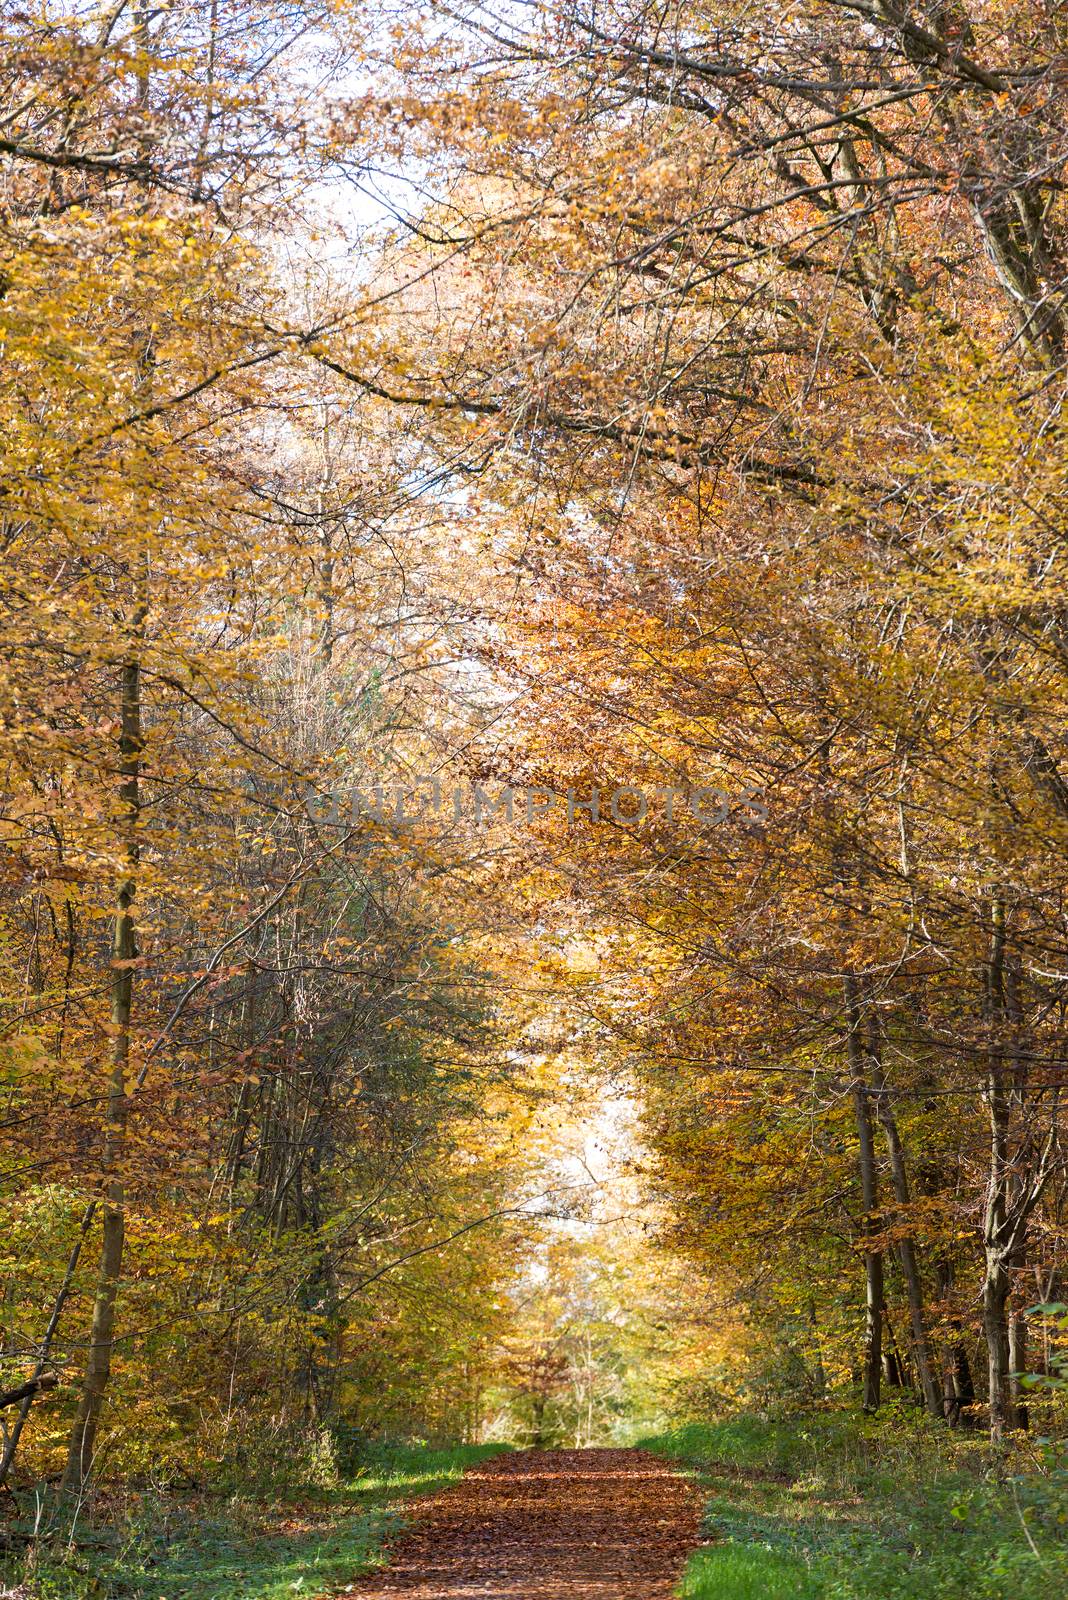 Pathway through the autumn forest by franky242